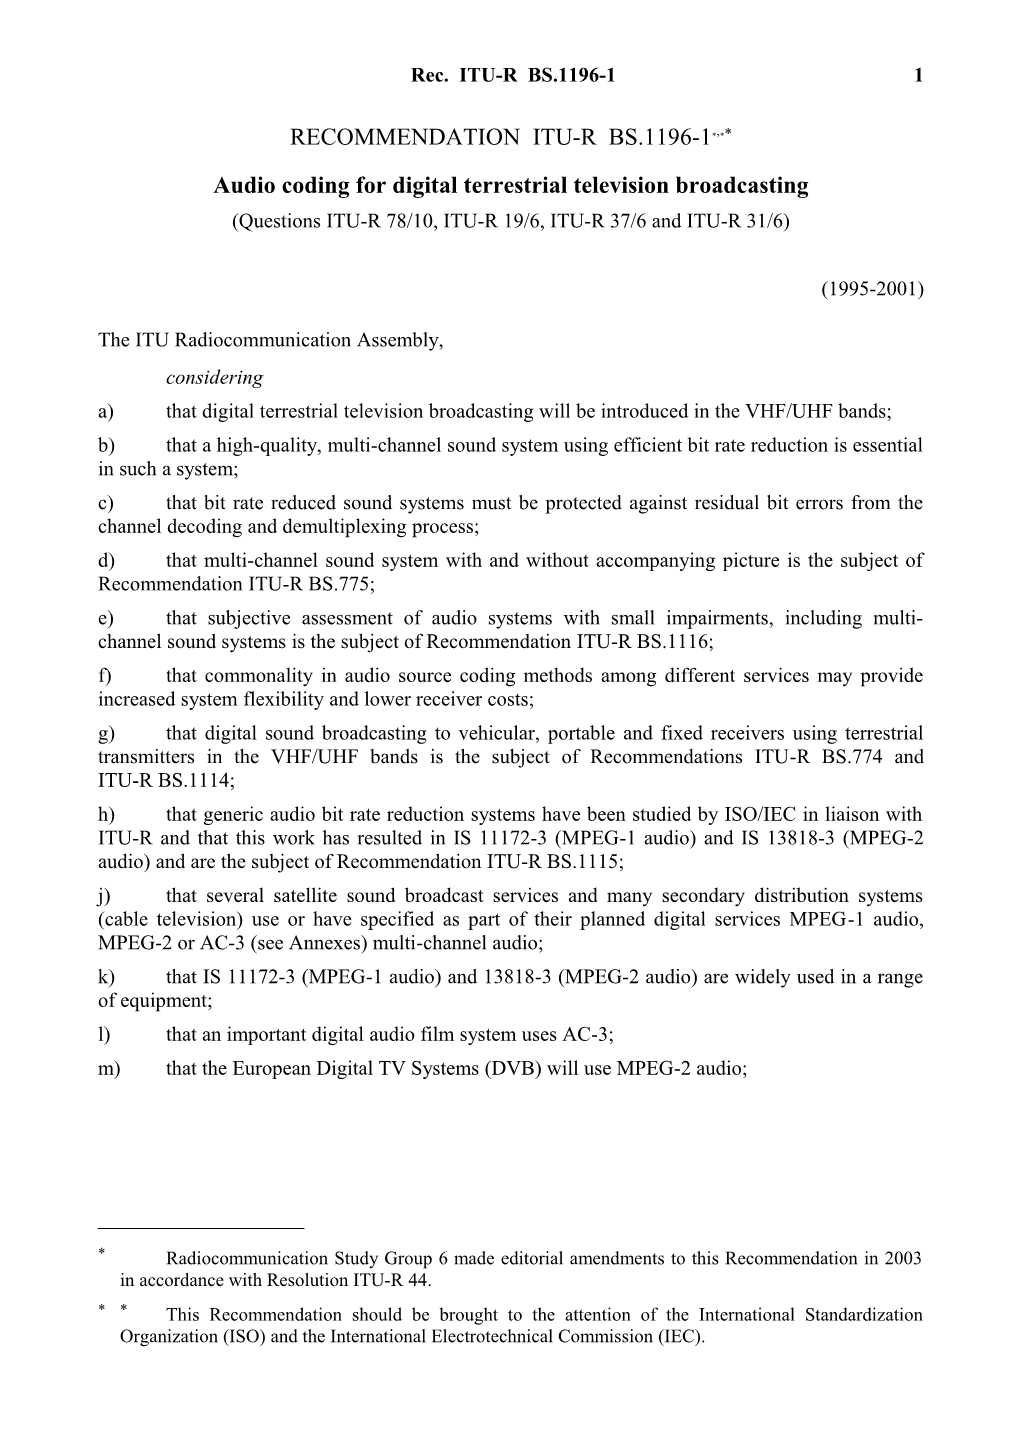 RECOMMENDATION ITU-R BS.1196-1 - Audio Coding for Digital Terrestrial Television Broadcasting